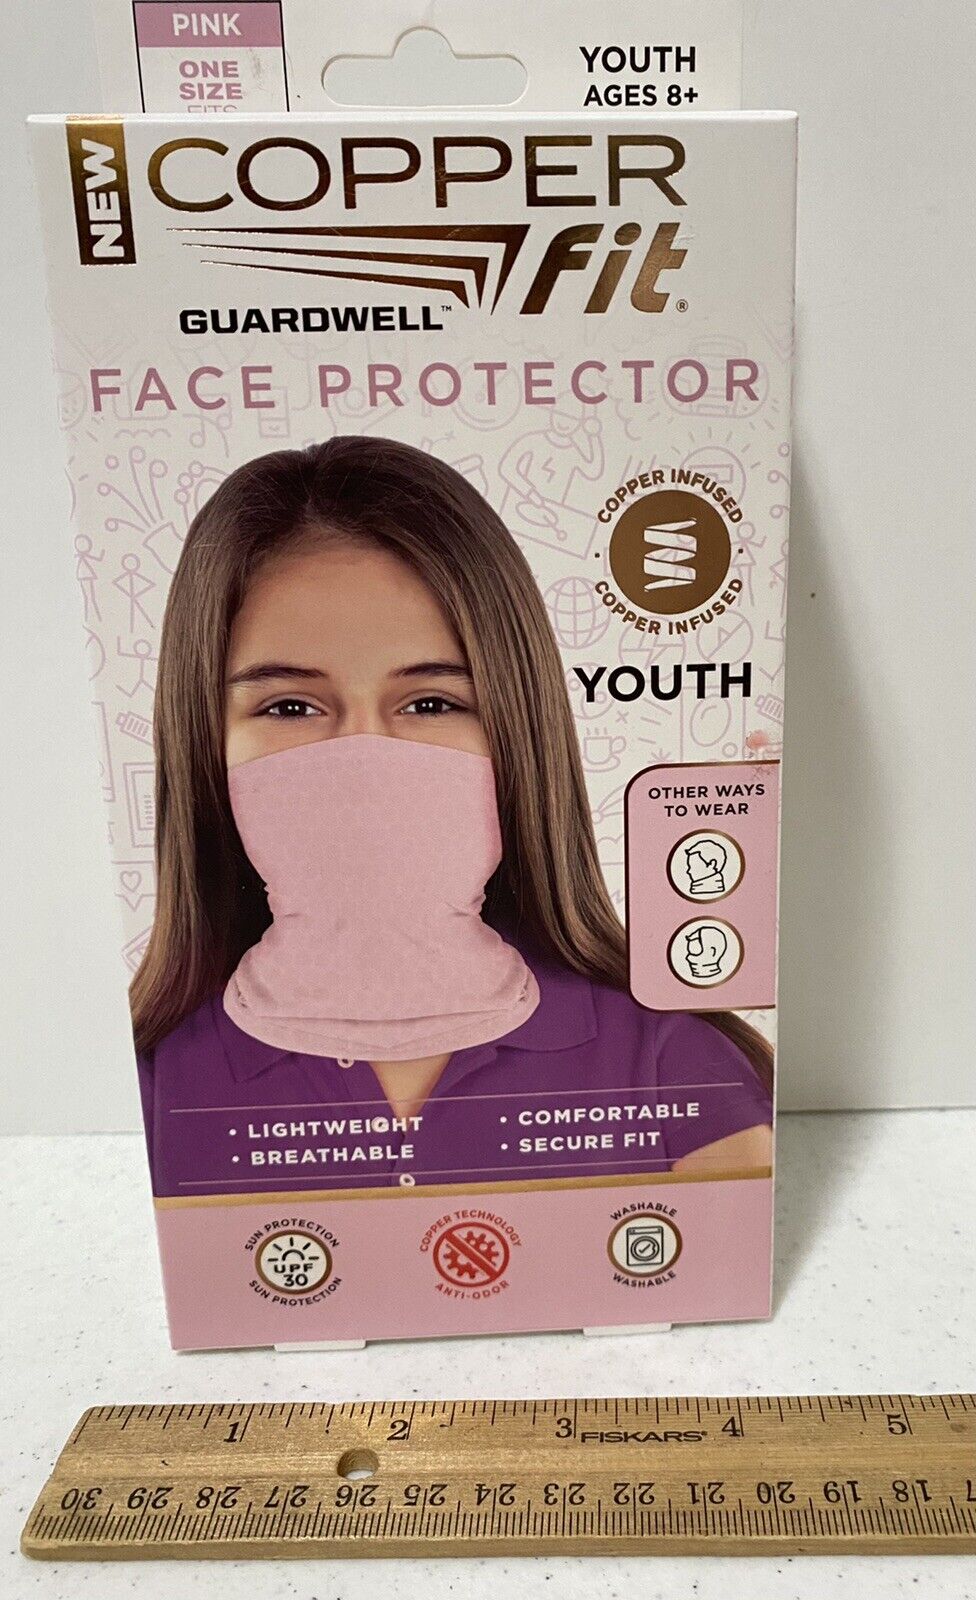 New 春先取りの Copper Fit Guardwell Face Protector Youth NIB 8+ 安いそれに目立つ Ages Pink